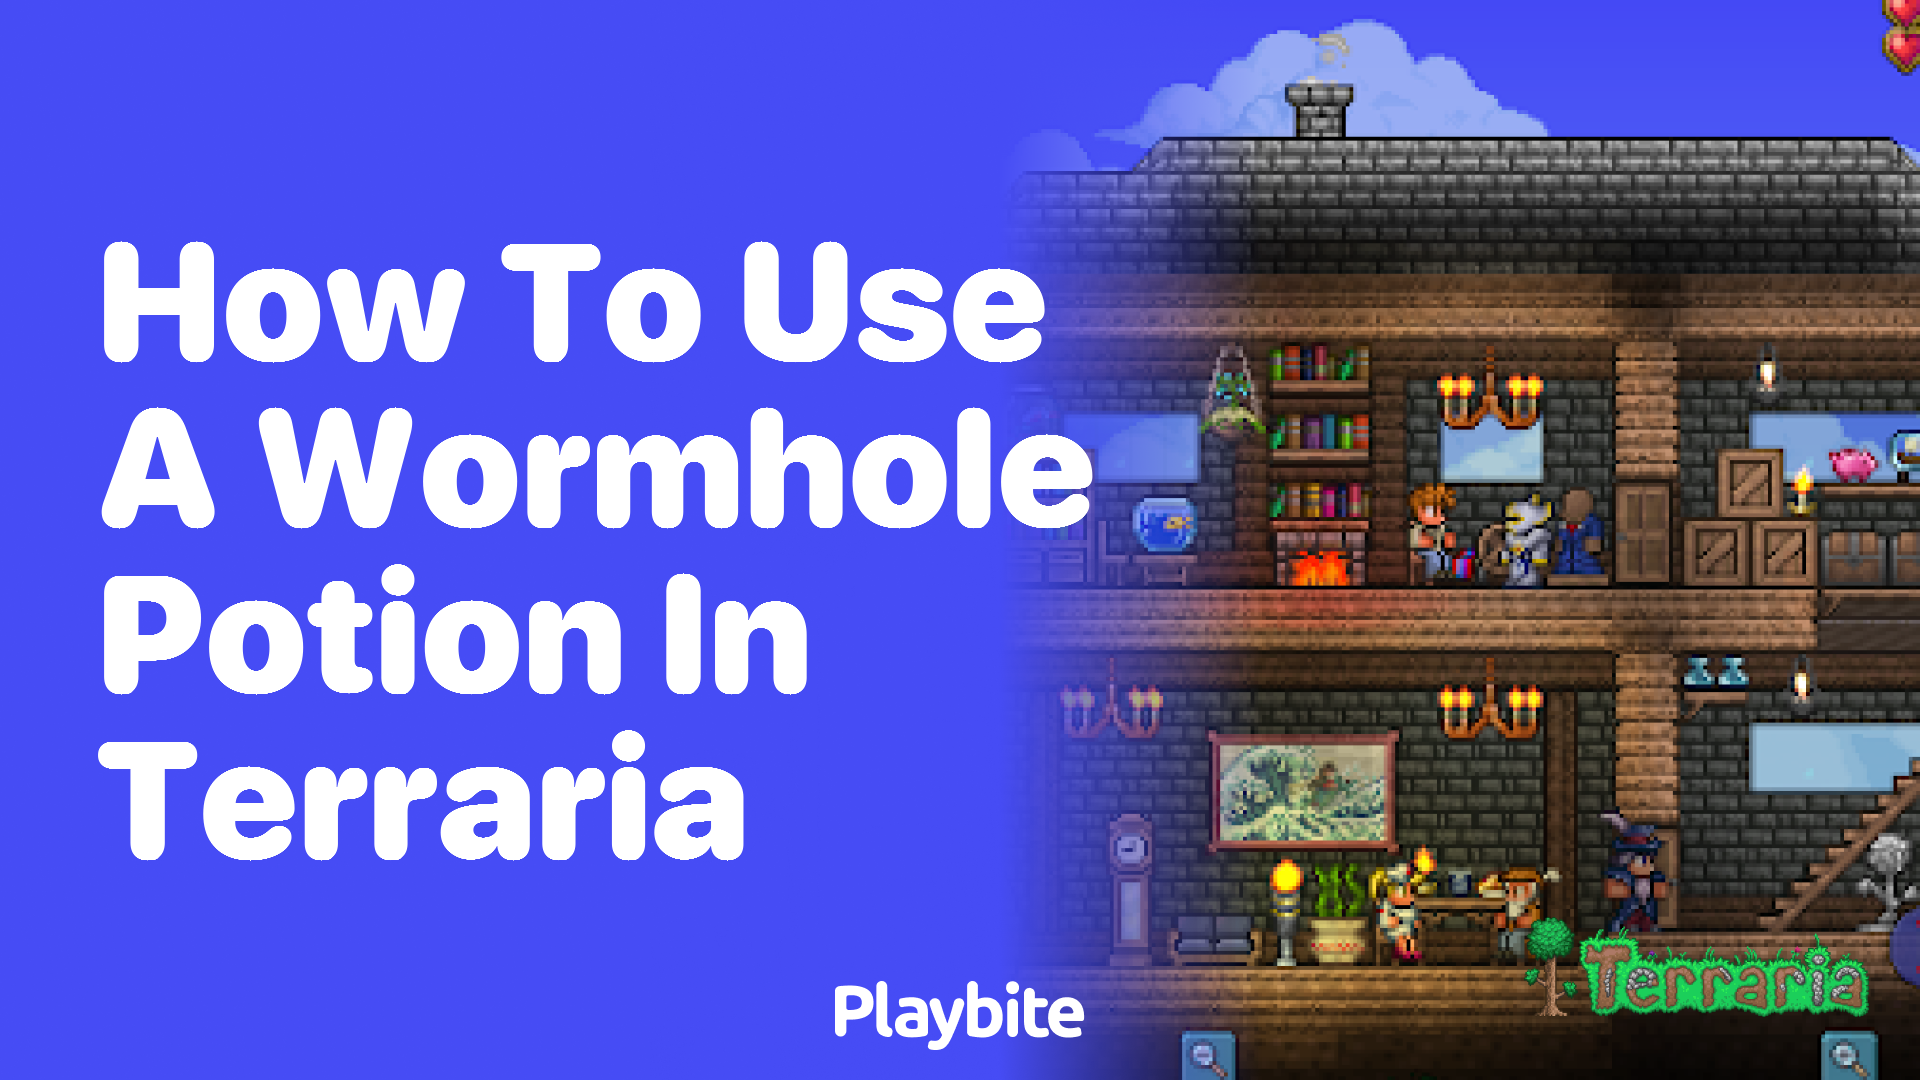 How to Use a Wormhole Potion in Terraria